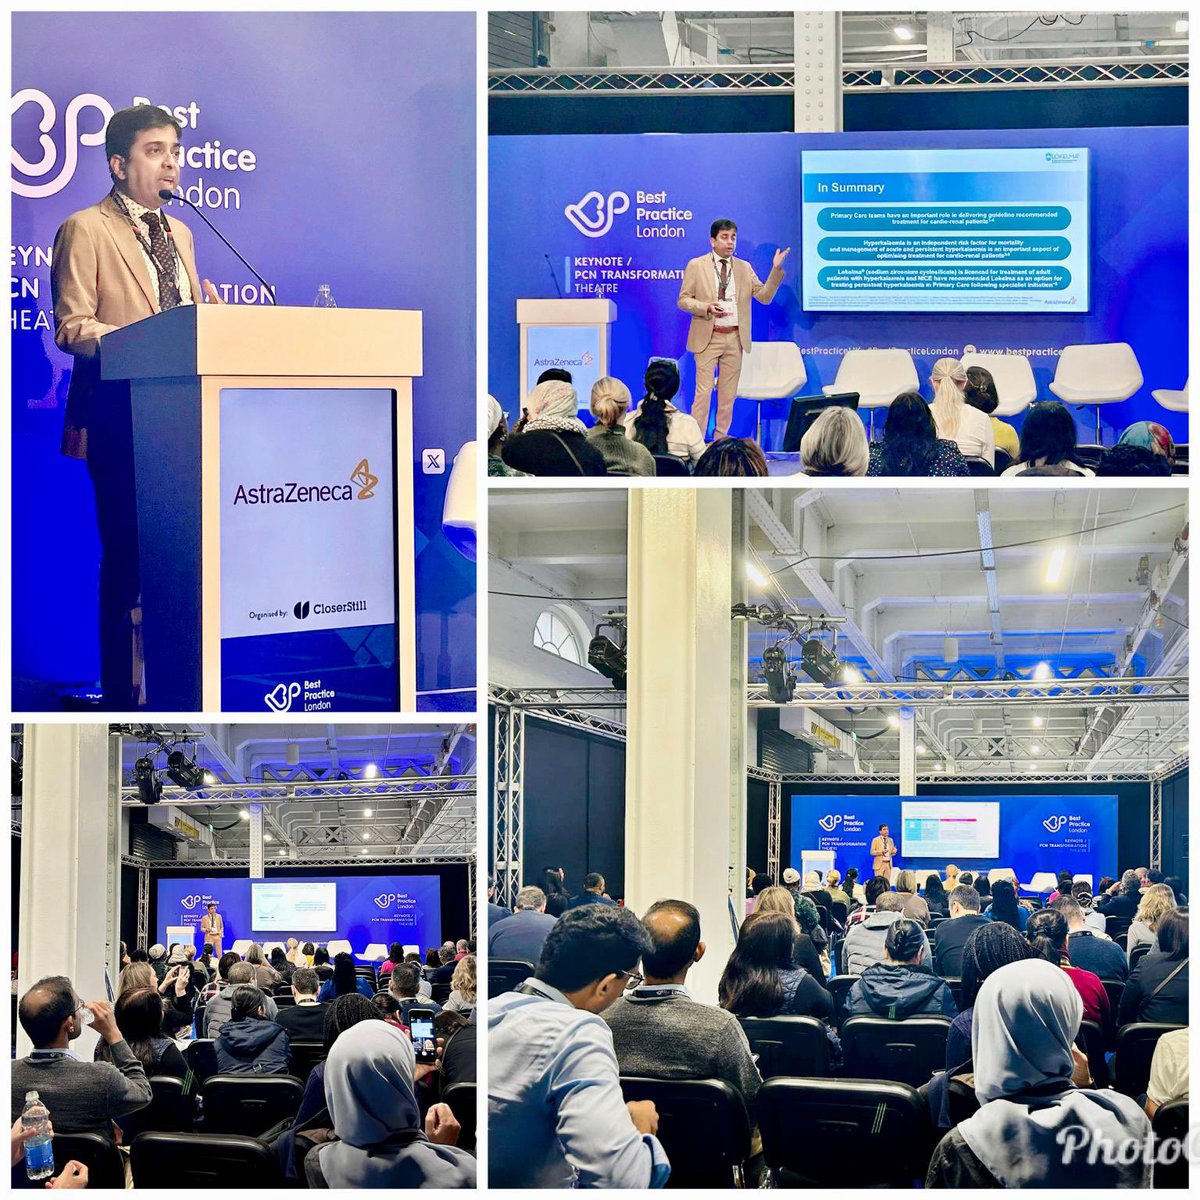 Good to speak at the Best Practice National conference at Olympia in London. The talk dealt with Cardio Renal Challeges in the new world & how best to optimise RAASi in #HeartFailure & #CKD patients. #Cardiology #HeartFailure #CKD #CardioRenal #GlobalHealth #CardioTwitter